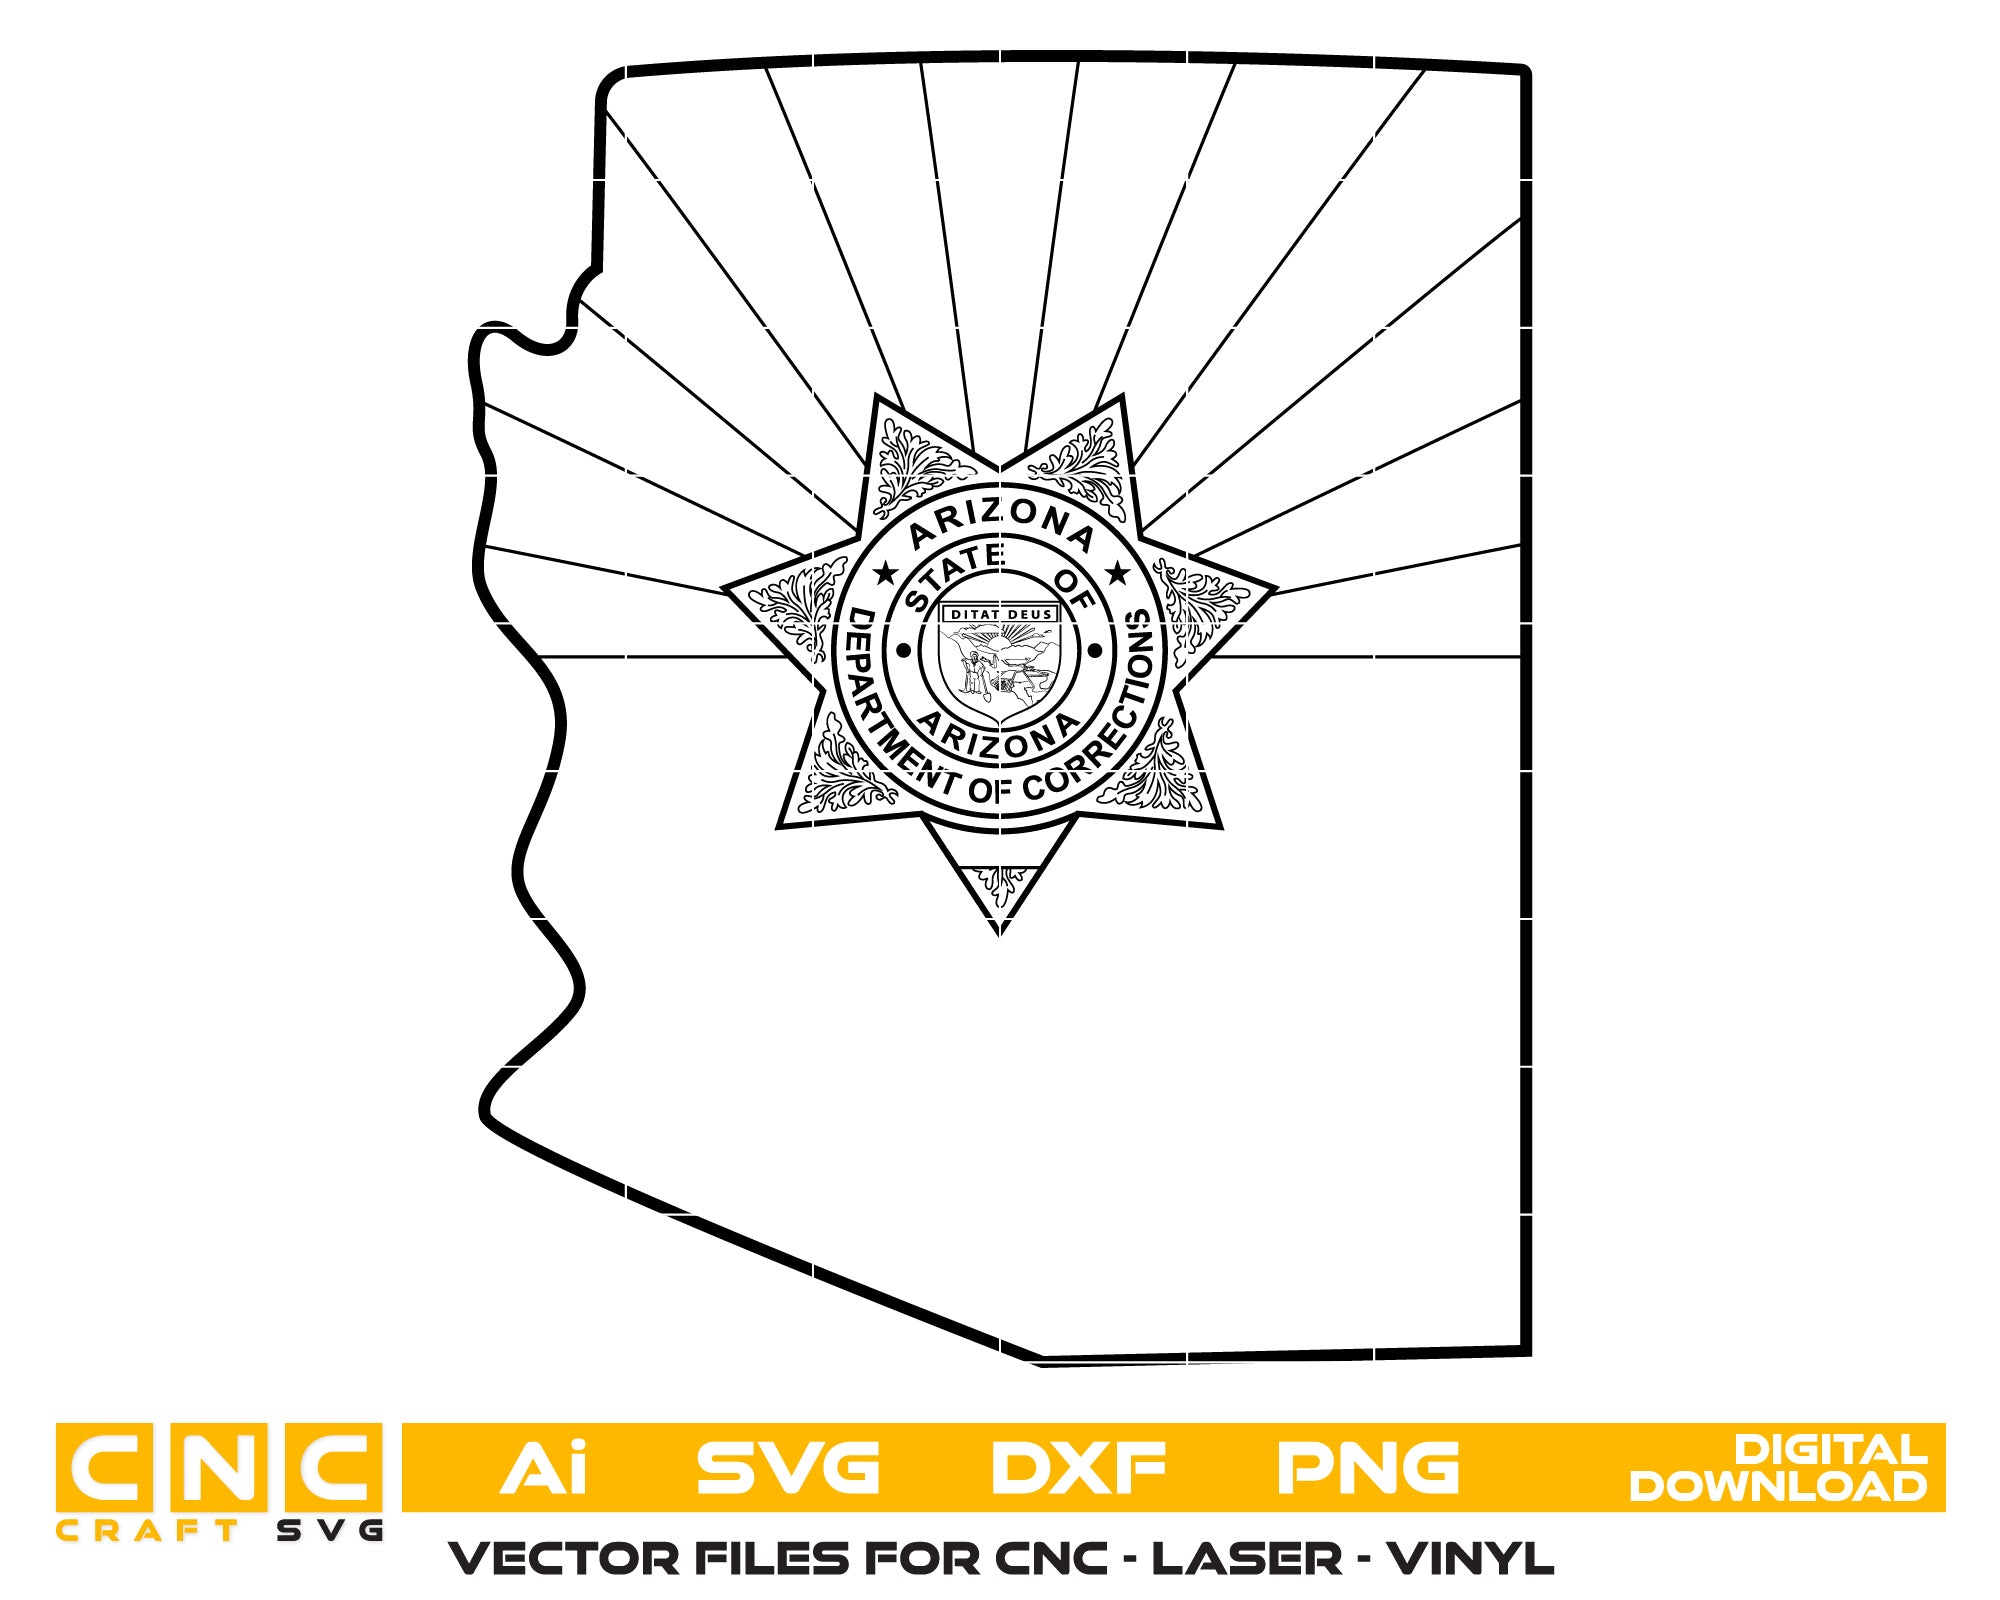 Arizona Department of Corrections Badge and Map vector art